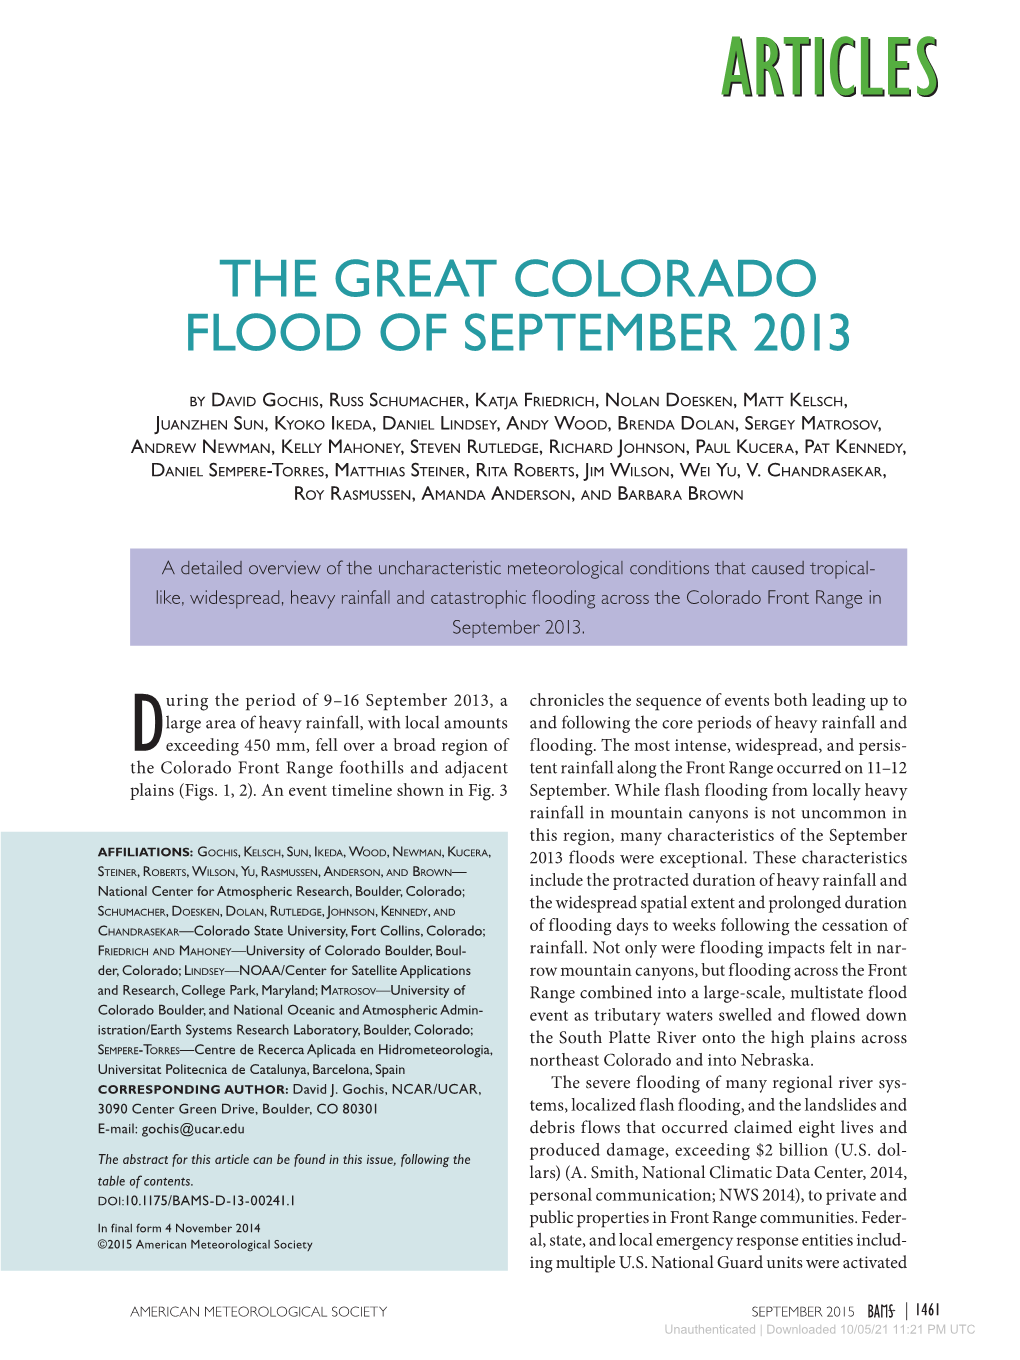 The Great Colorado Flood of September 2013